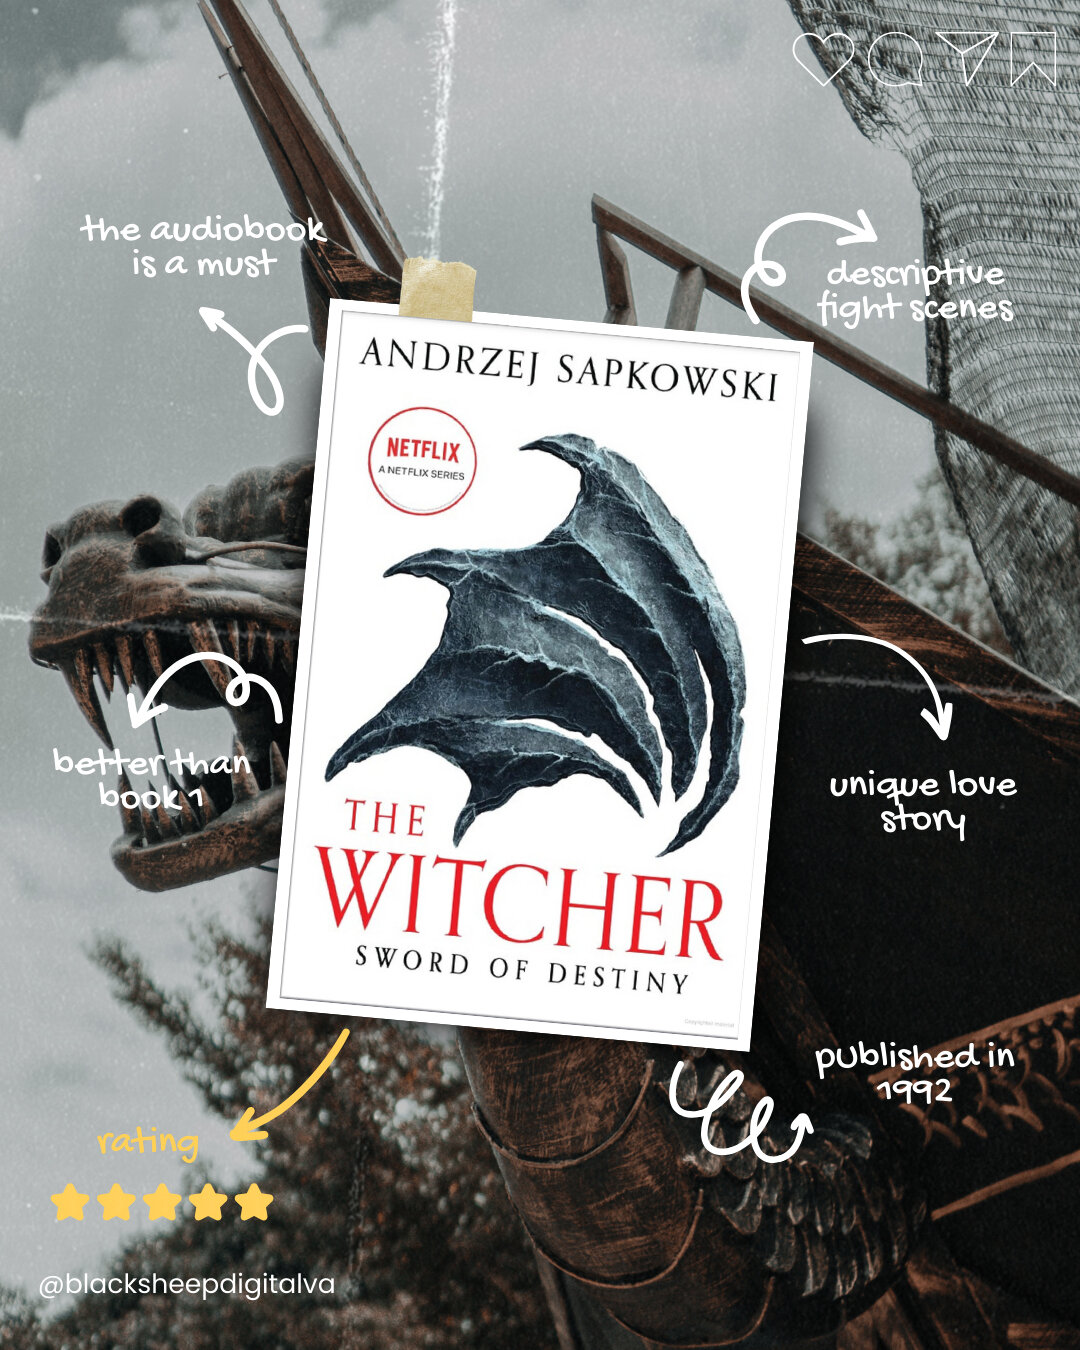 When I tell you, I am obsessed 👏🏻⁣

I began reading The Witcher series about a month ago and just finished the second book, as you see here. 

I struggled to get into the first book because of the writing style, but when I transferred to the audiob